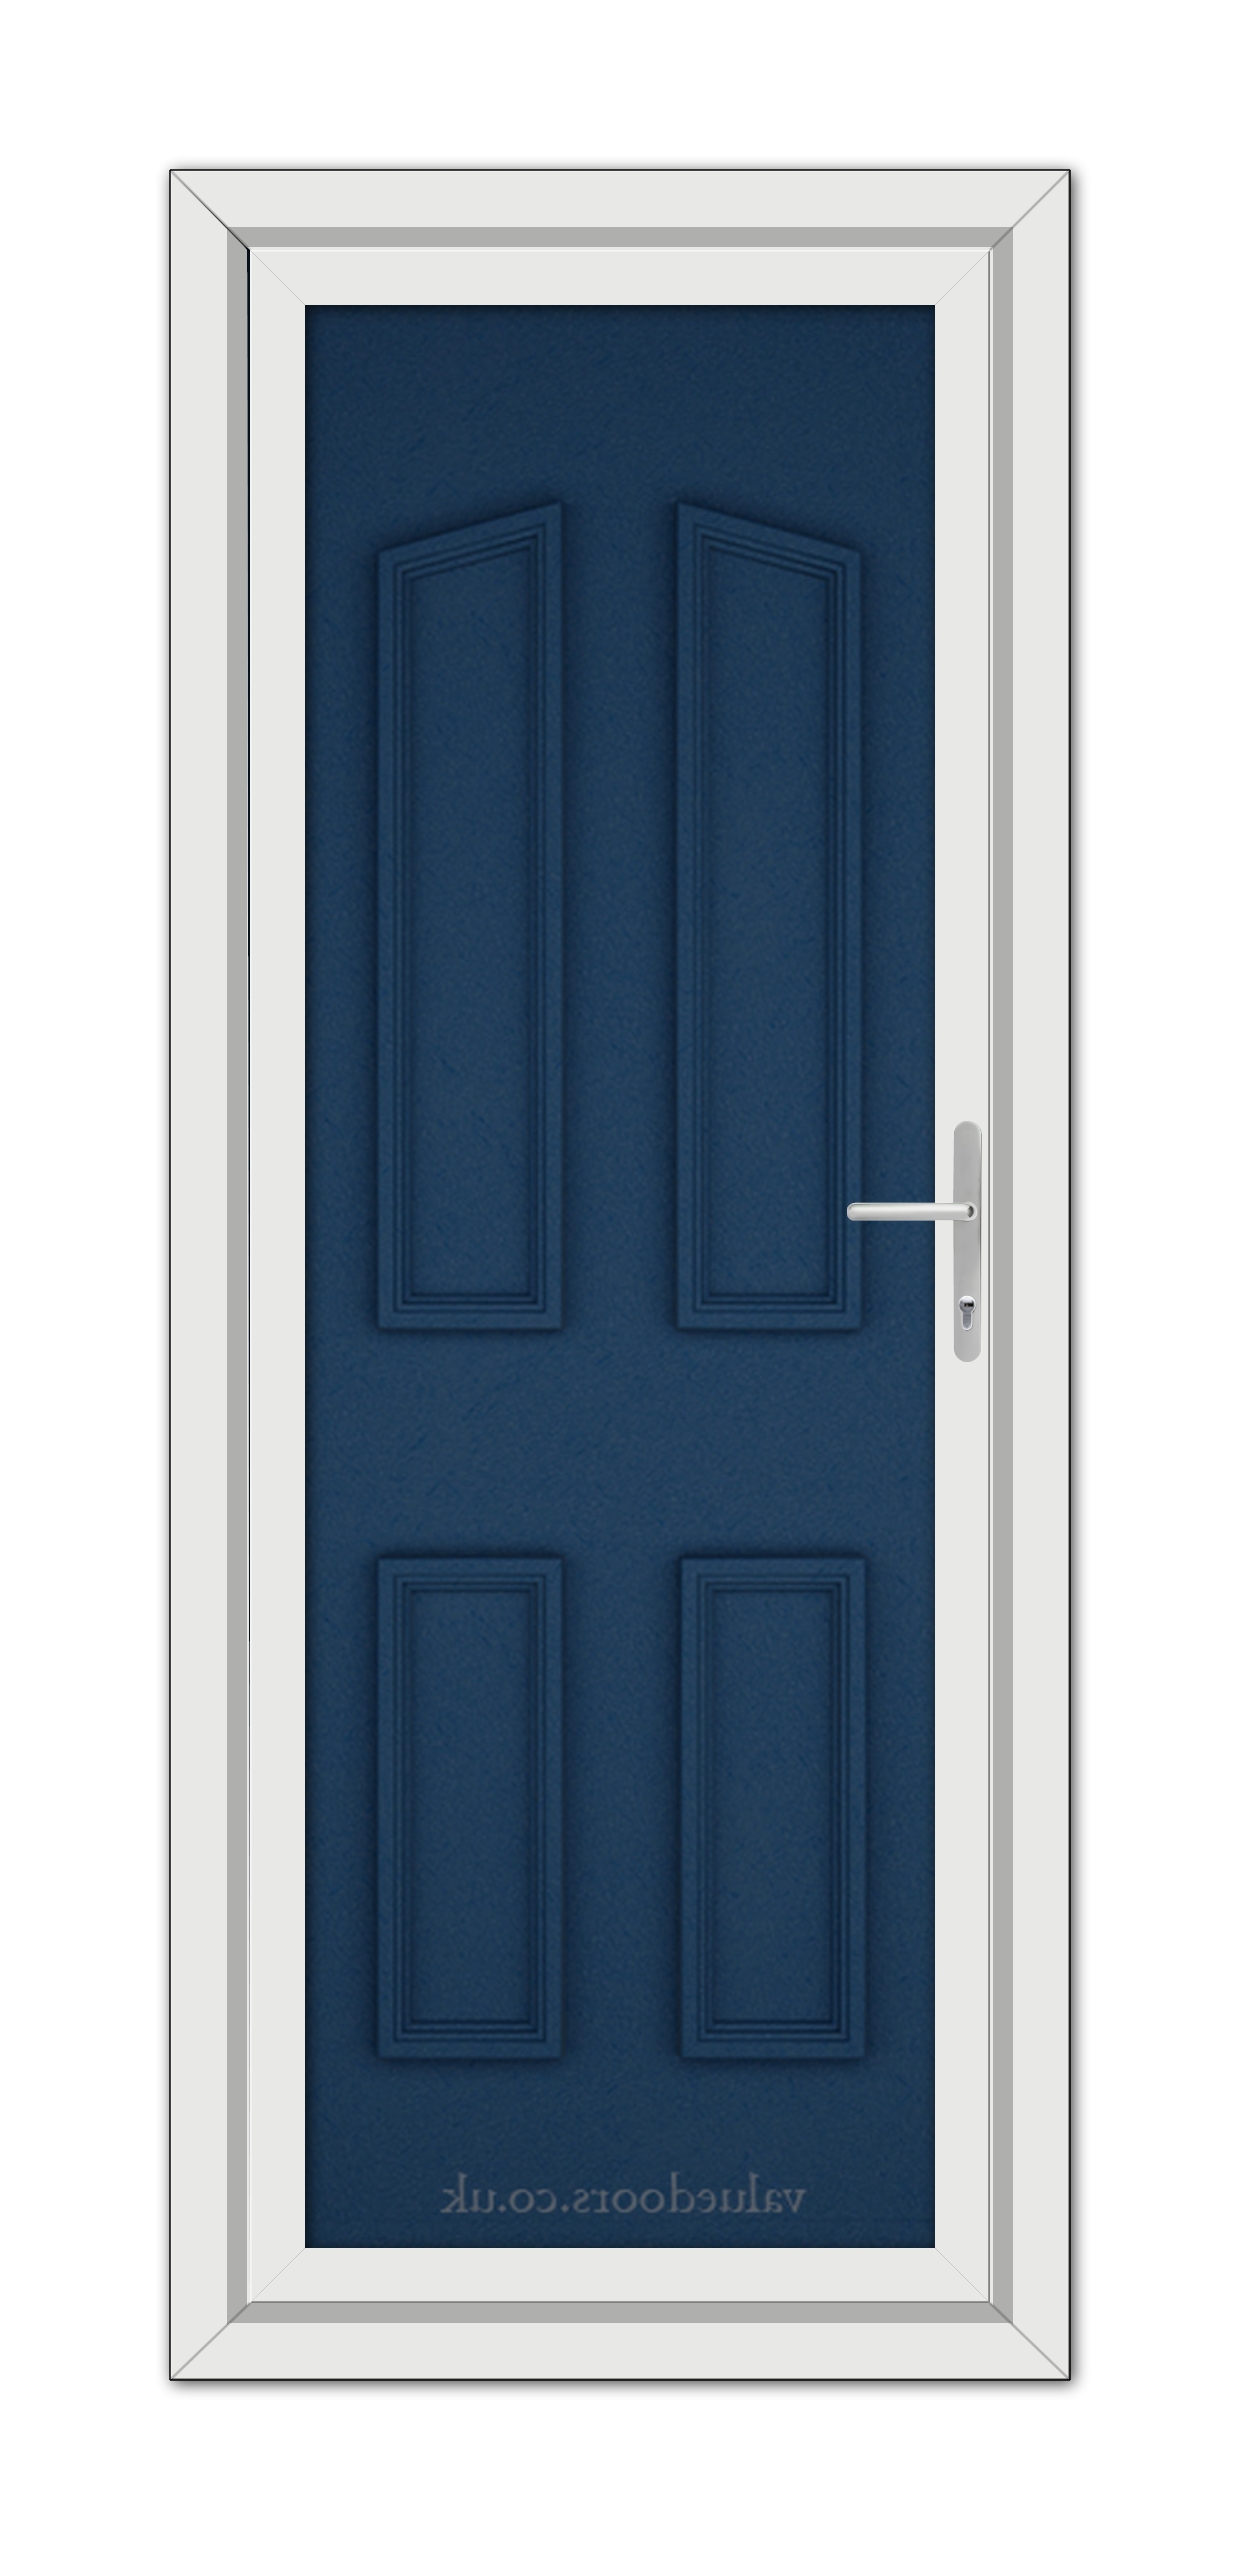 A modern Blue Kensington Solid uPVC Door with two recessed panels and a silver handle, set within a white door frame.